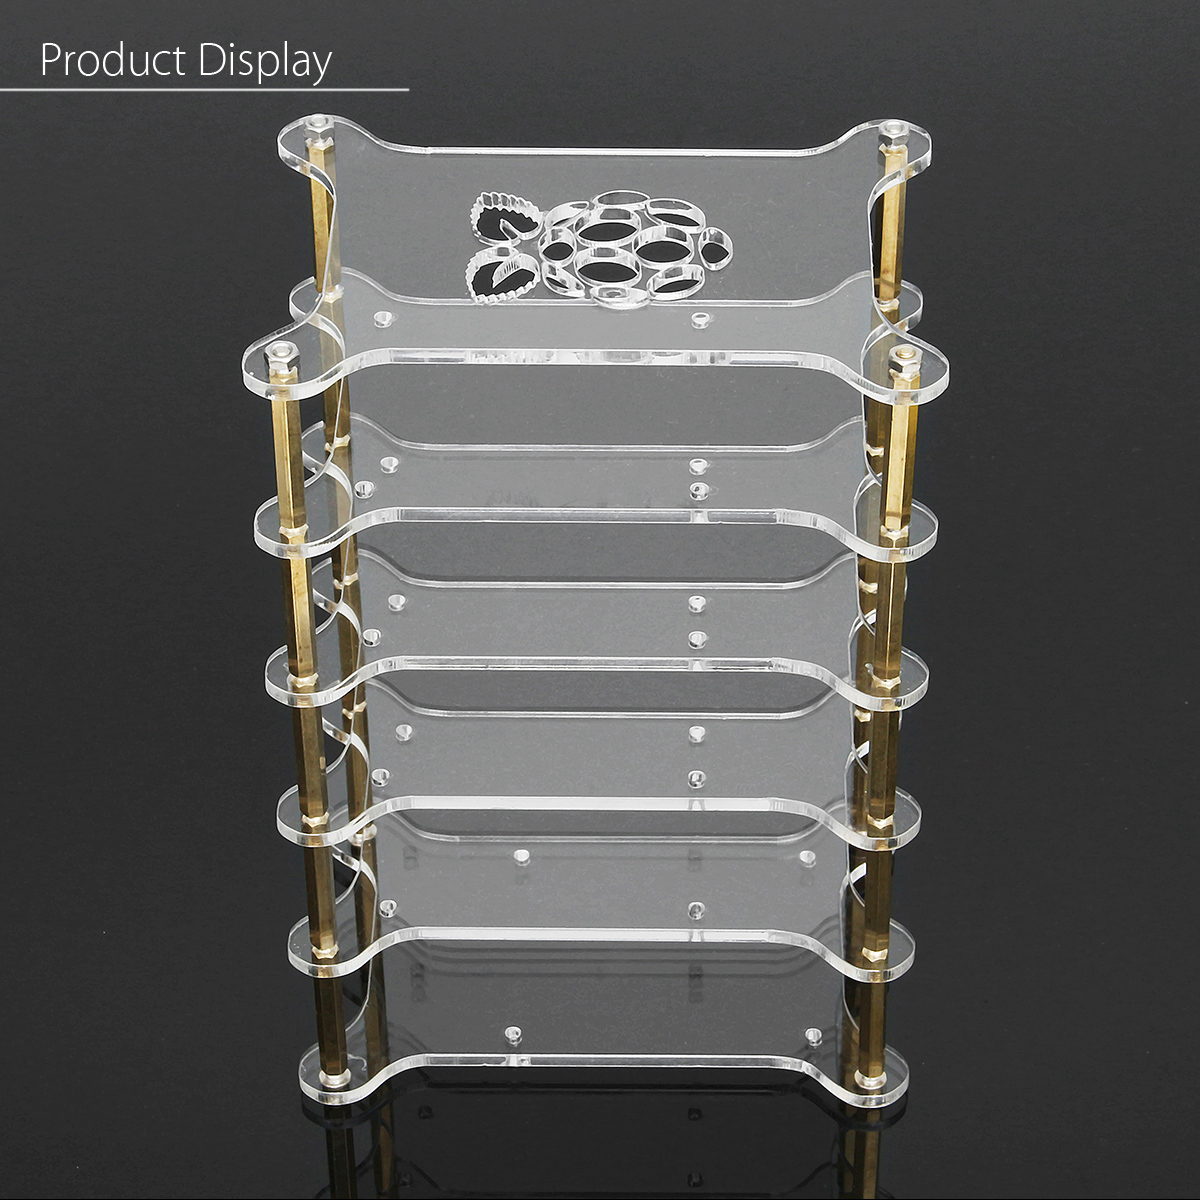 Four (4) Layer Stackable Clear Acrylic Raspberry Pi 5, Pi 4 & Pi 3 Cases  with Fans and Heatsinks - Micro Connectors, Inc.